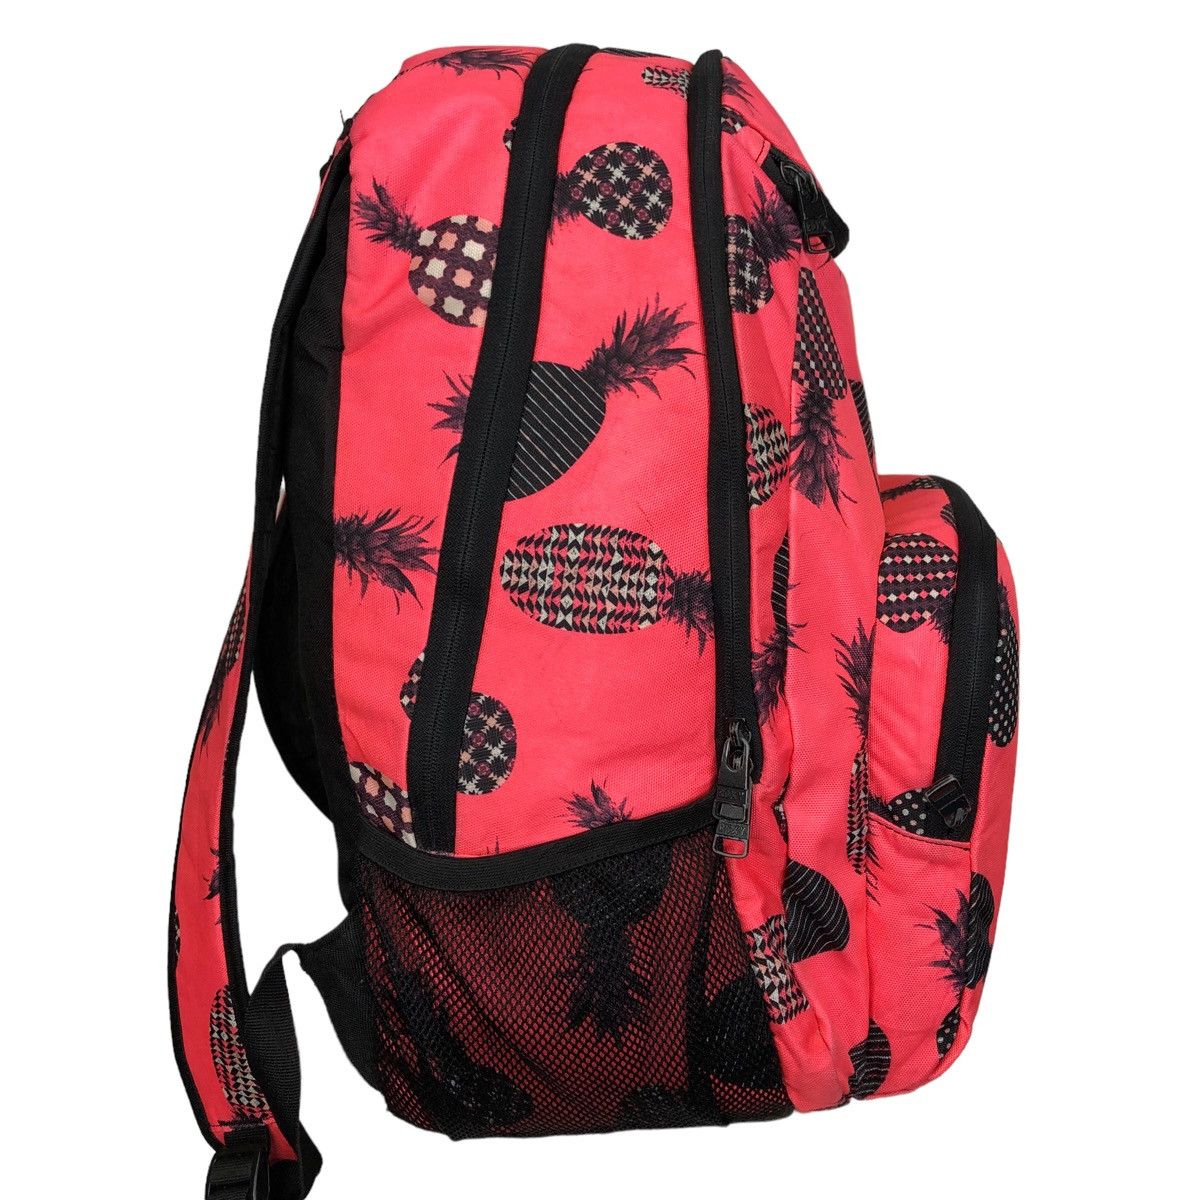 Quicksilver - Roxy Pineapple Backpack - 4